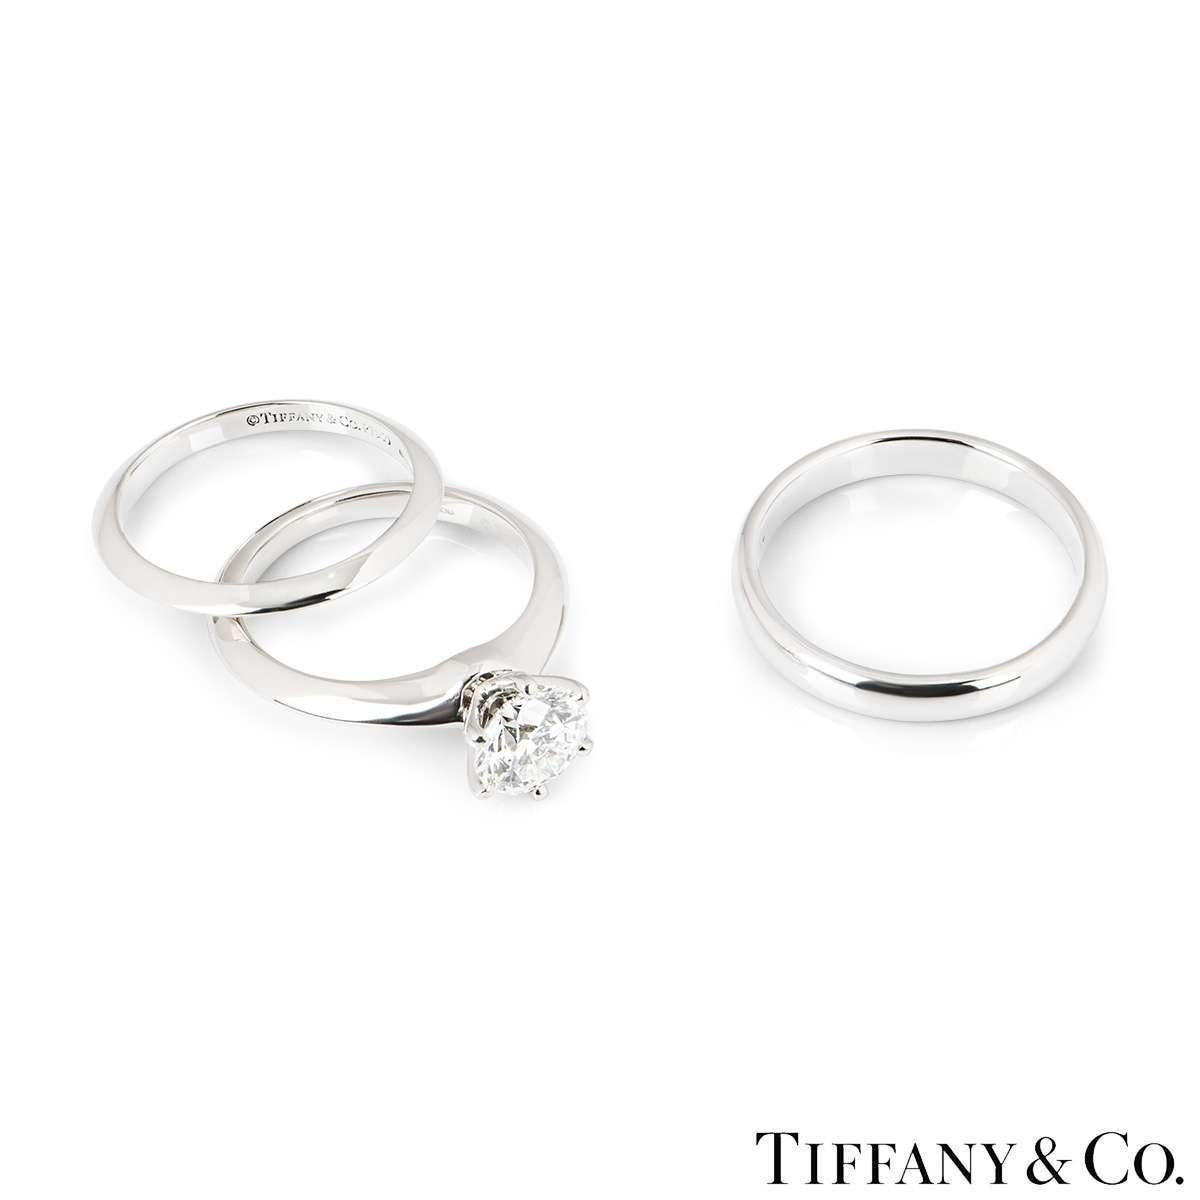 Round Cut Tiffany & Co. Bridal Suite with Diamond Solitaire Ring and Wedding Bands 1.21 Ct